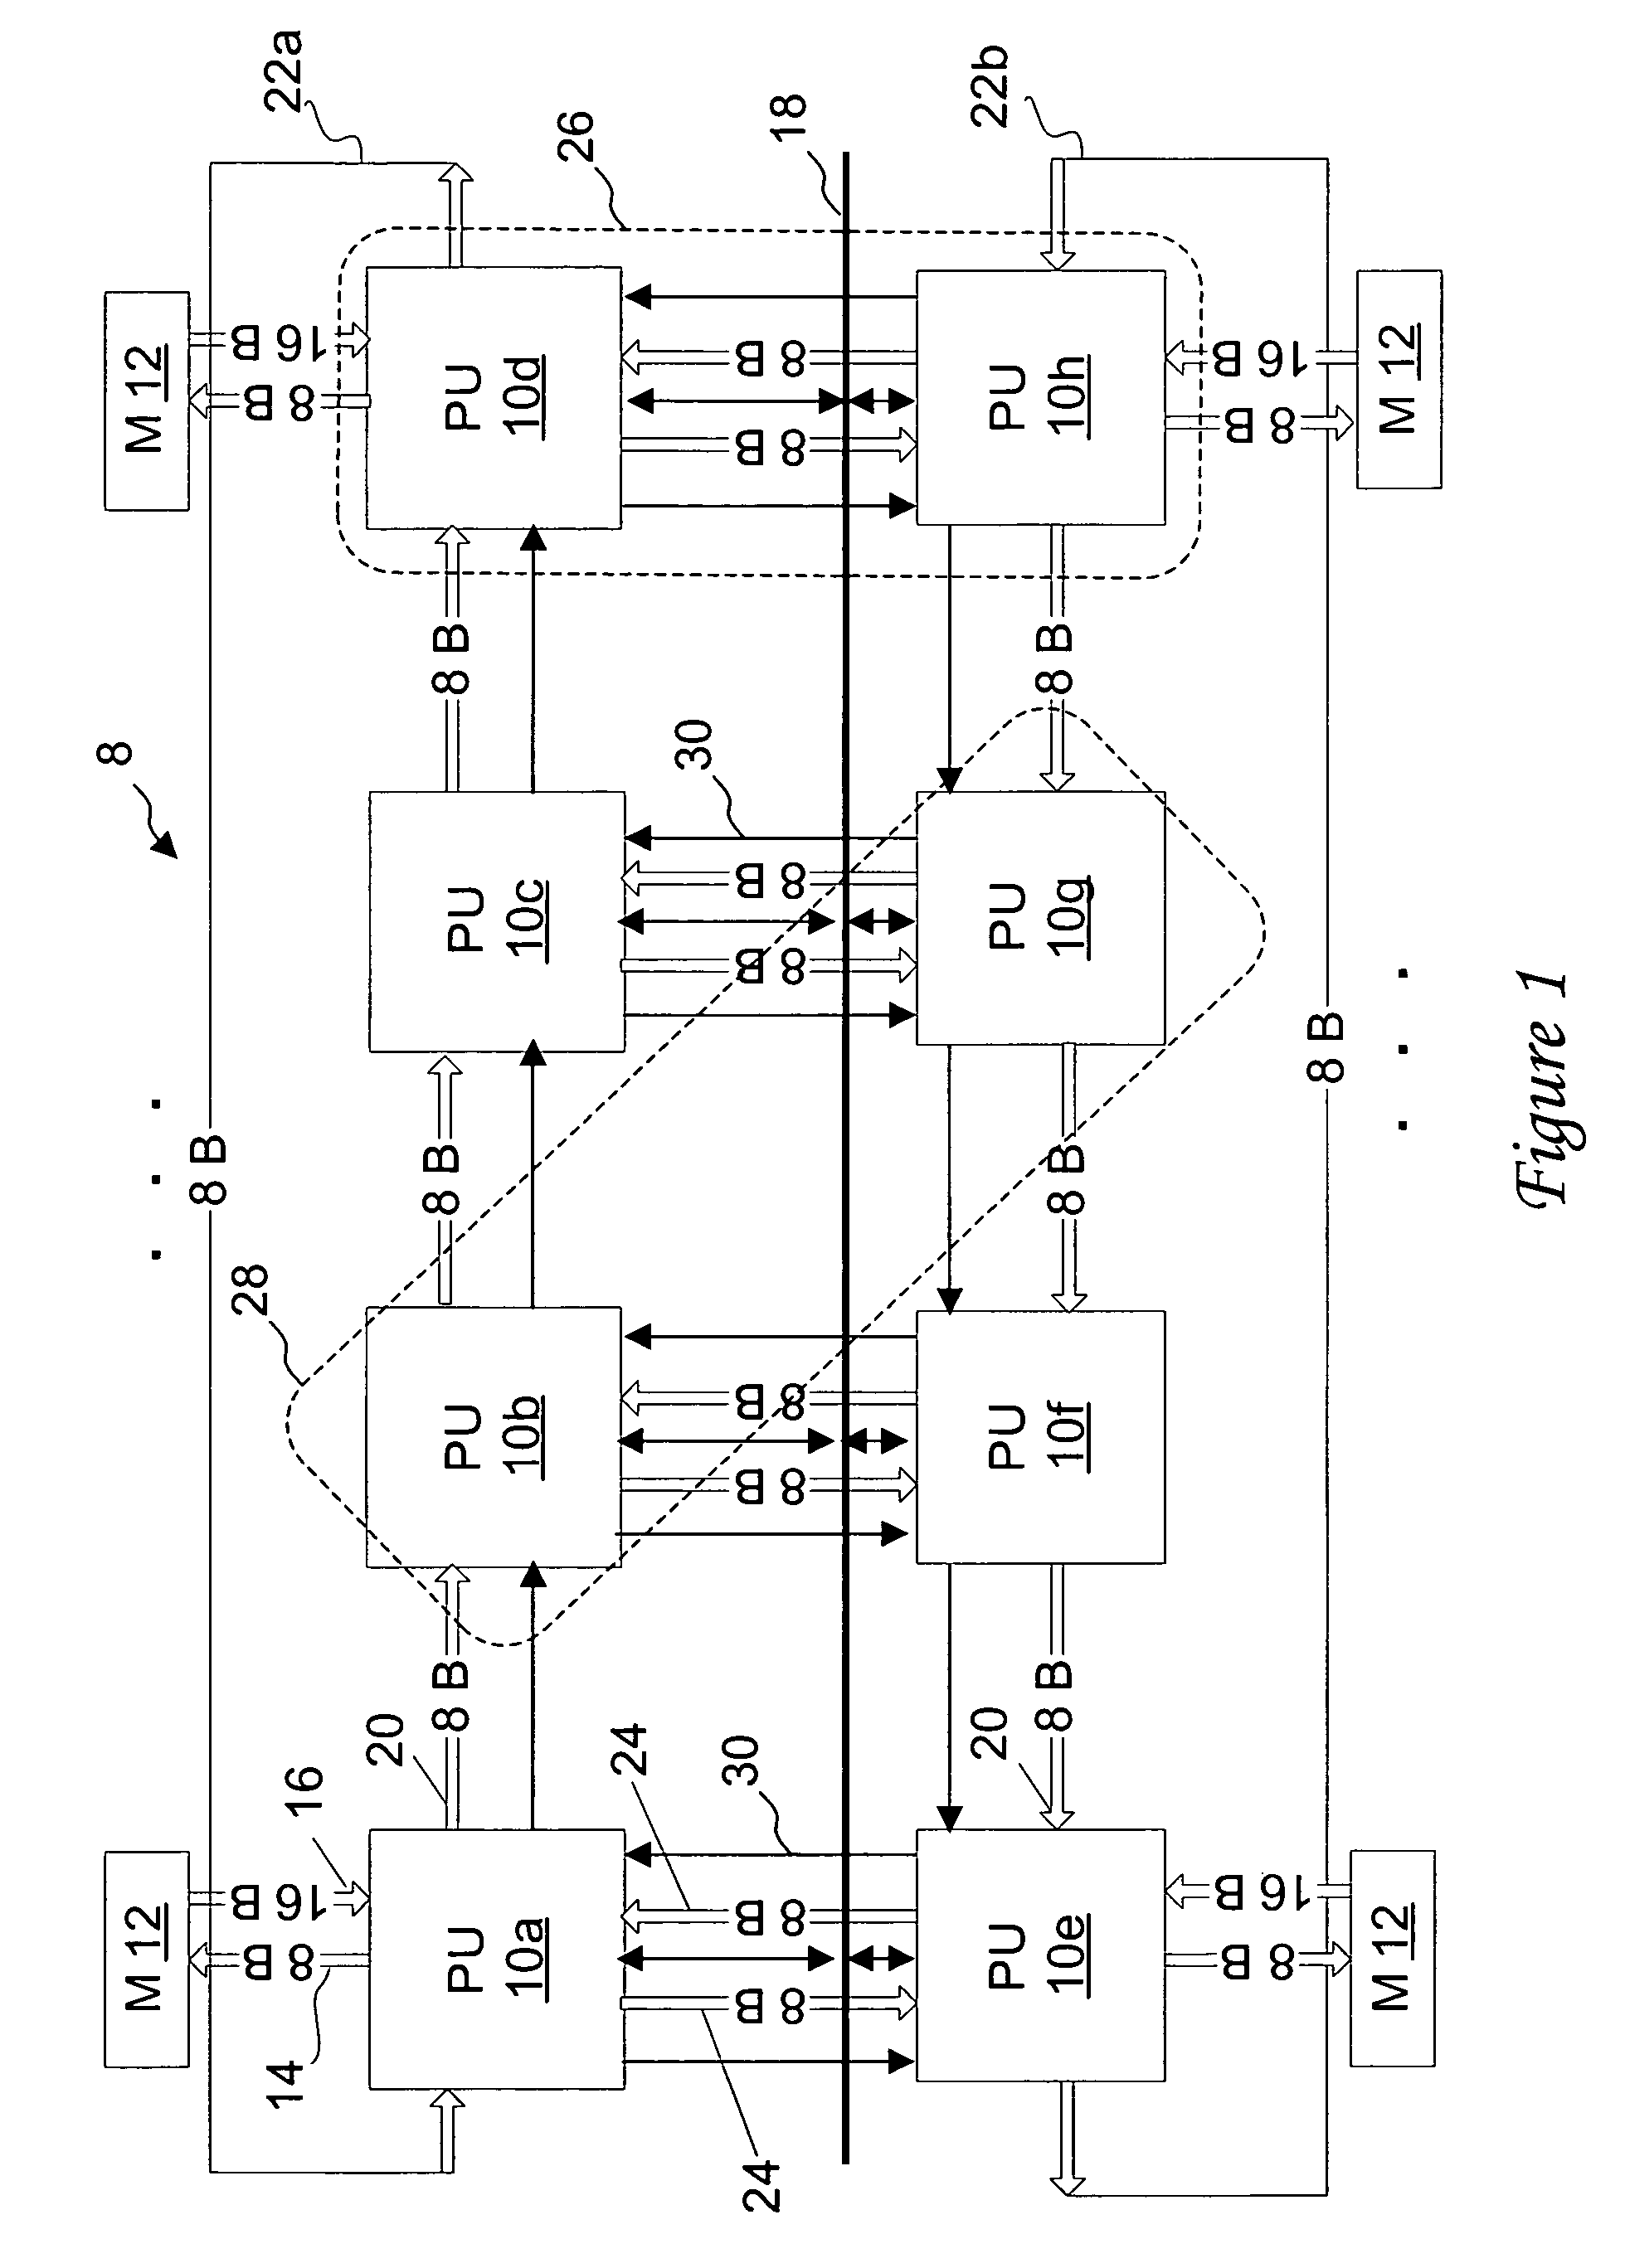 Multiprocessor data processing system having scalable data interconnect and data routing mechanism